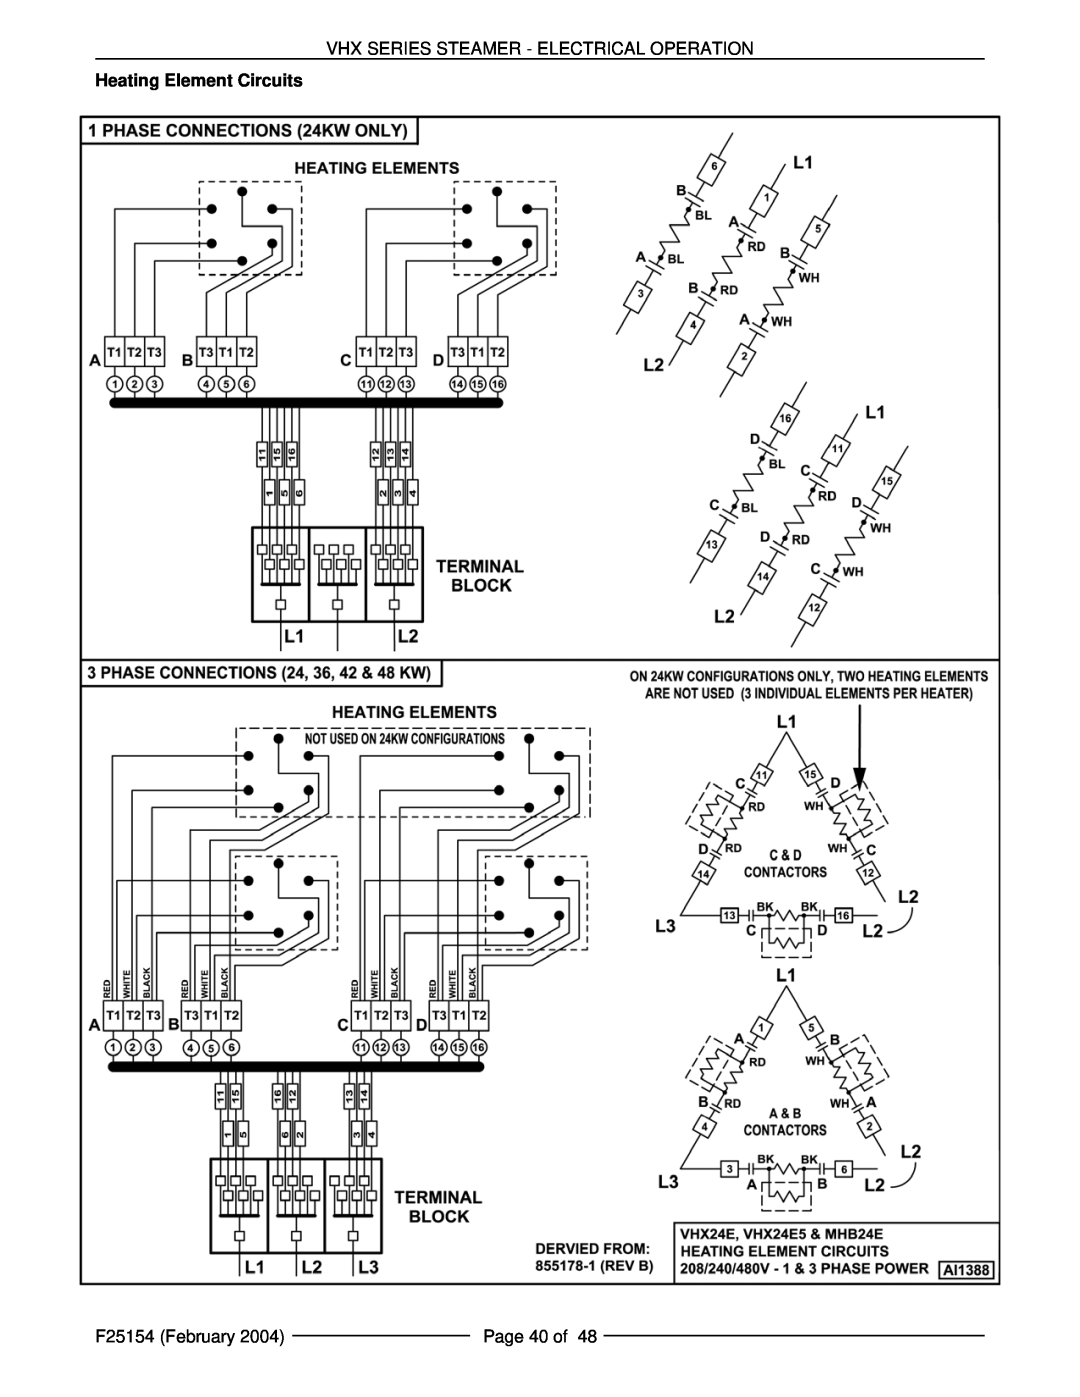 Vulcan-Hart ML-126857 Heating Element Circuits, Vhx Series Steamer - Electrical Operation, F25154 February, Page 40 of 